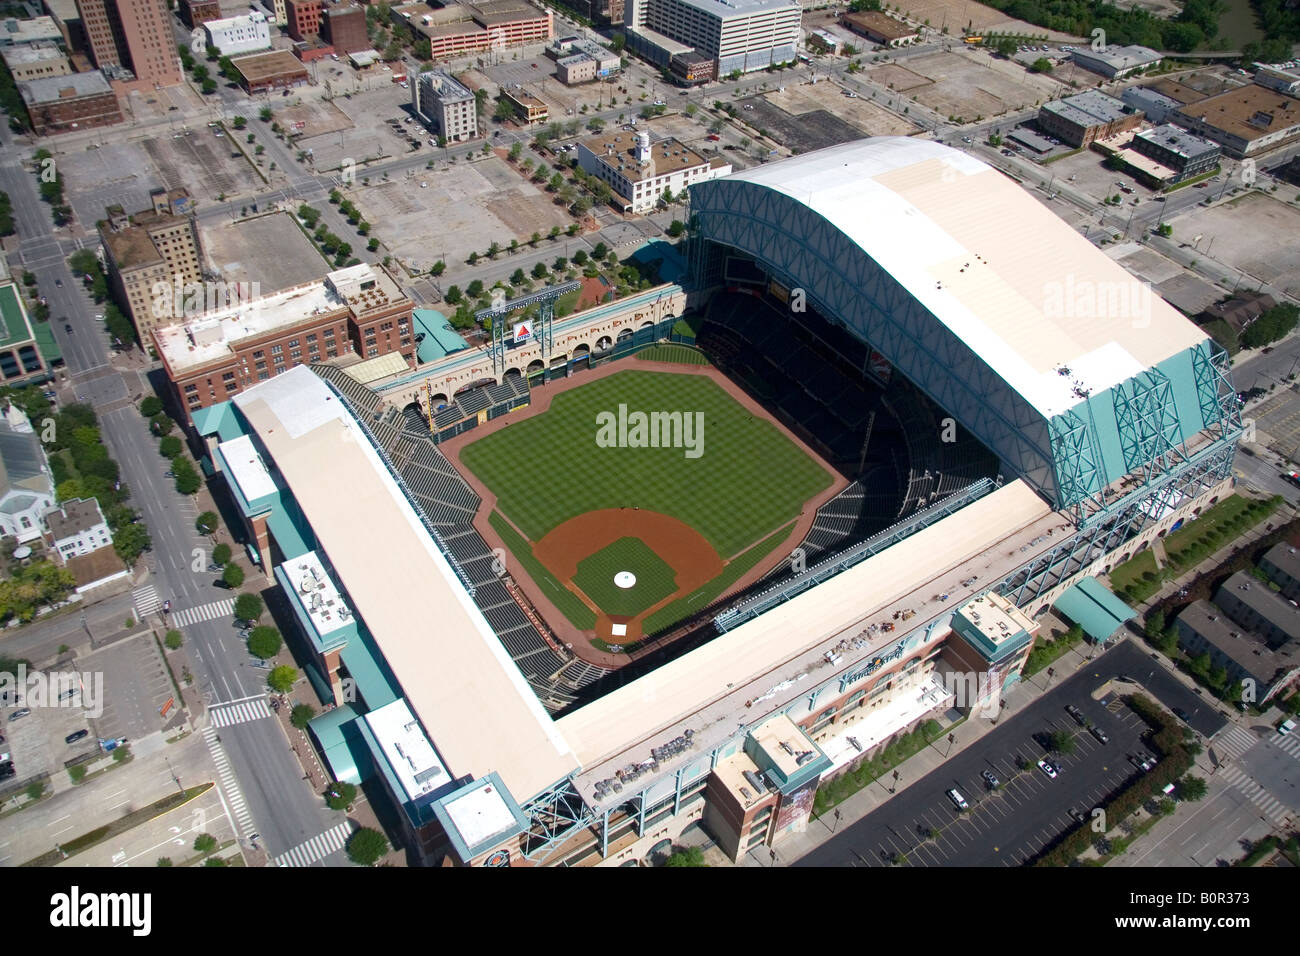 Houston Astros Unsigned Minute Maid Park Open Roof Stadium Photograph